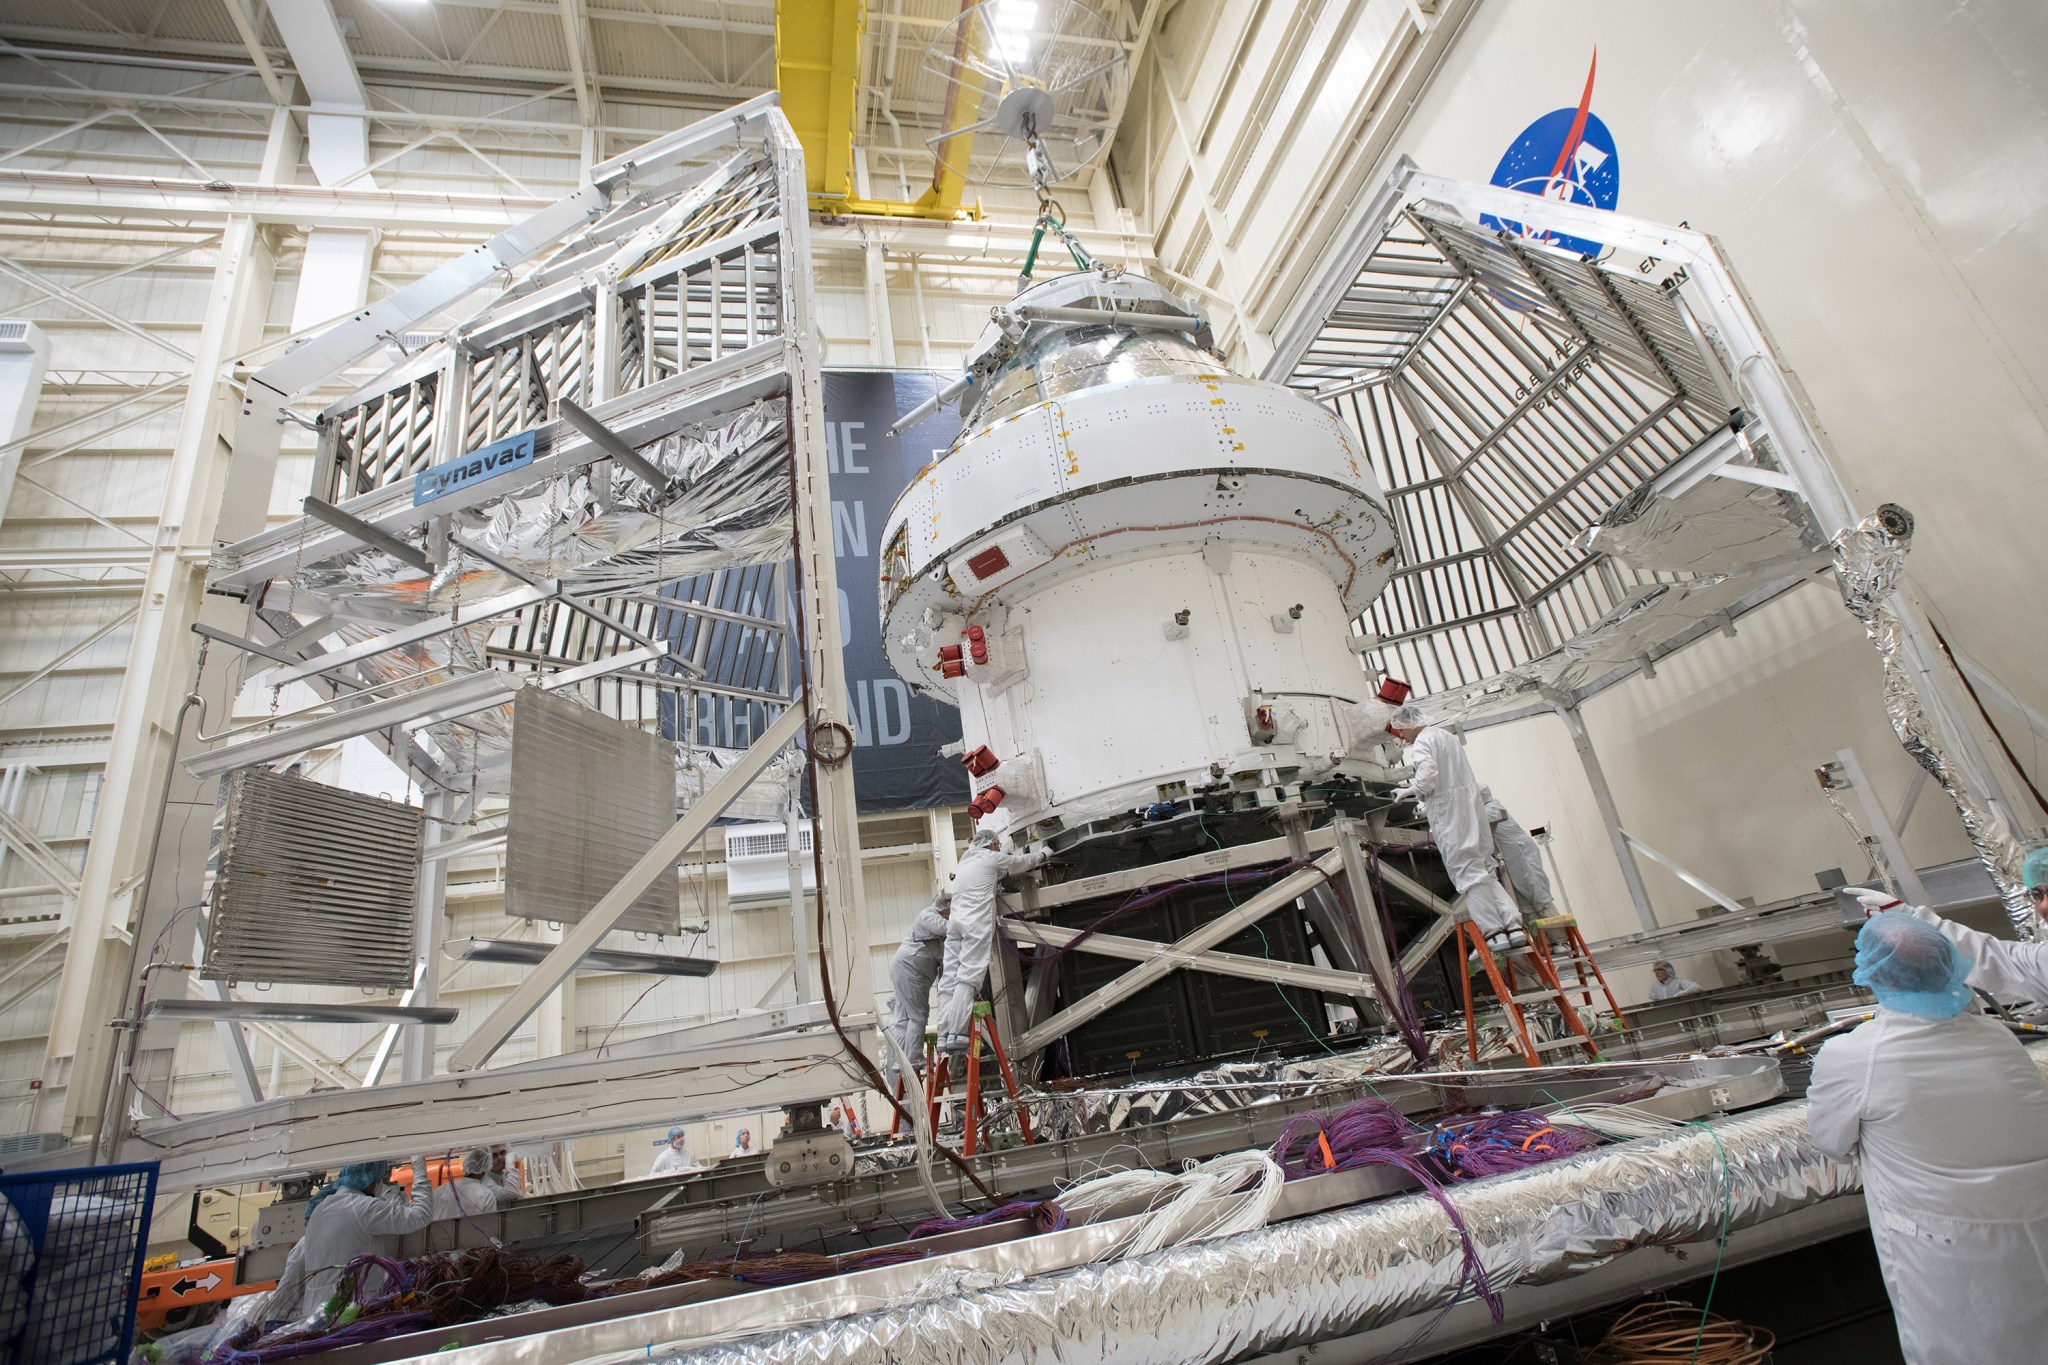 The Orion Spacecraft being prepped to enter the testing chamber at Plum Brook Station